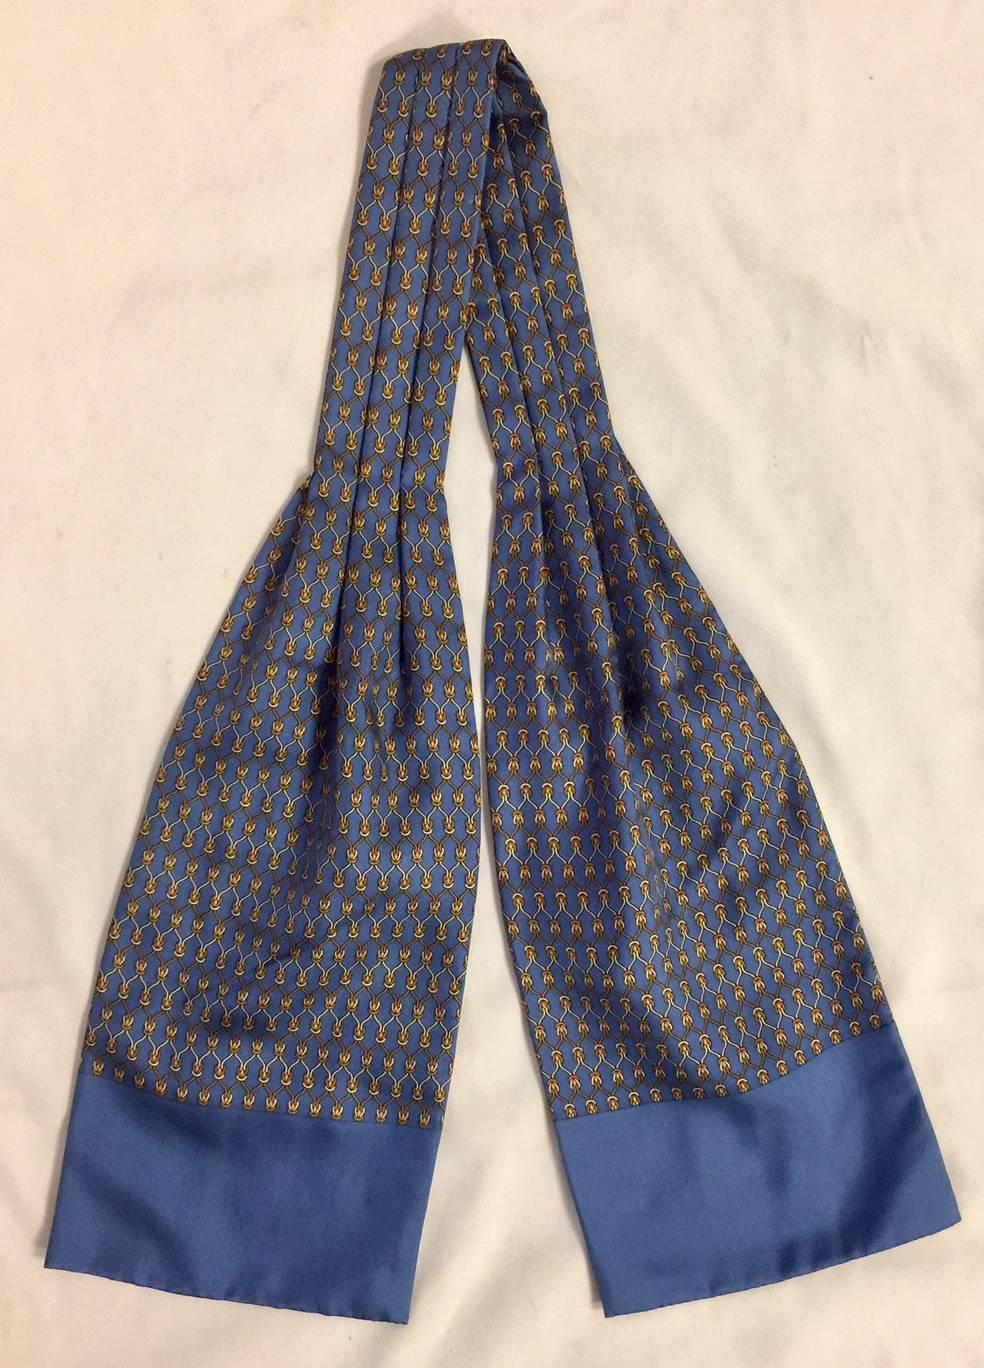 This elegant Hermes cravat is in a double thickness silk, with solid colour endings, and a chain link pattern in shades of classic blues. Cut a dashing figure in this timeless cravat!